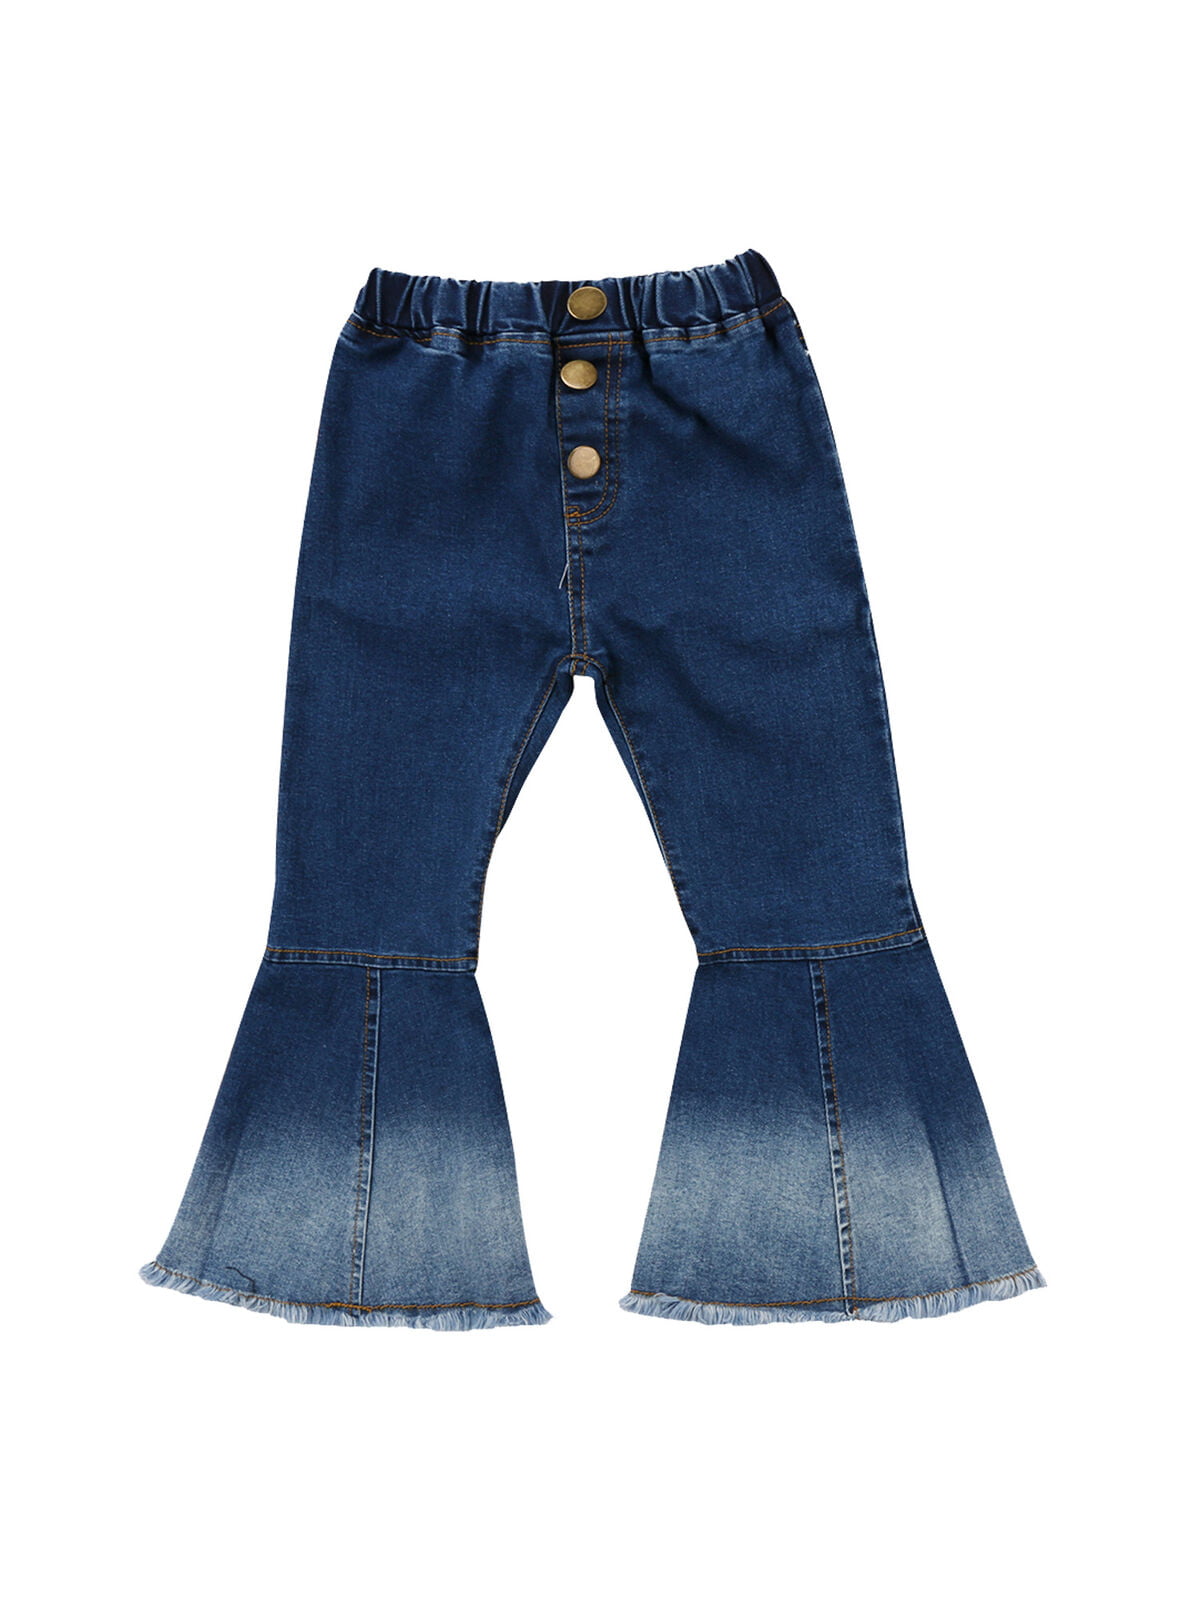 Details about   Toddler Kids Baby Girls Patch Long Jeans Pants Child Denim Trousers Bottoms New